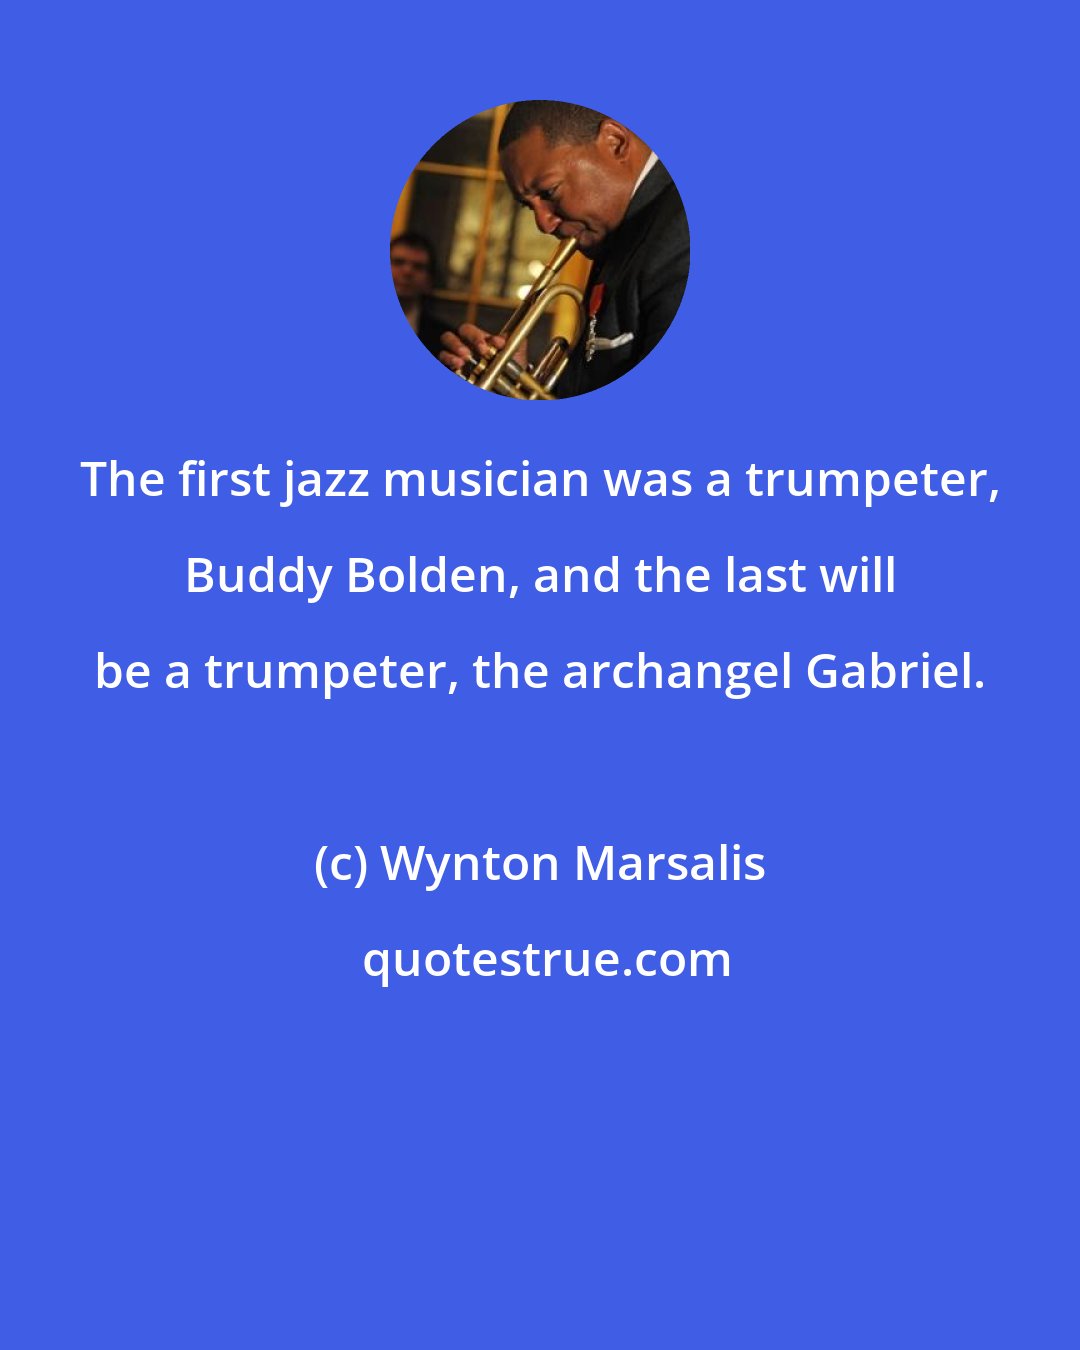 Wynton Marsalis: The first jazz musician was a trumpeter, Buddy Bolden, and the last will be a trumpeter, the archangel Gabriel.